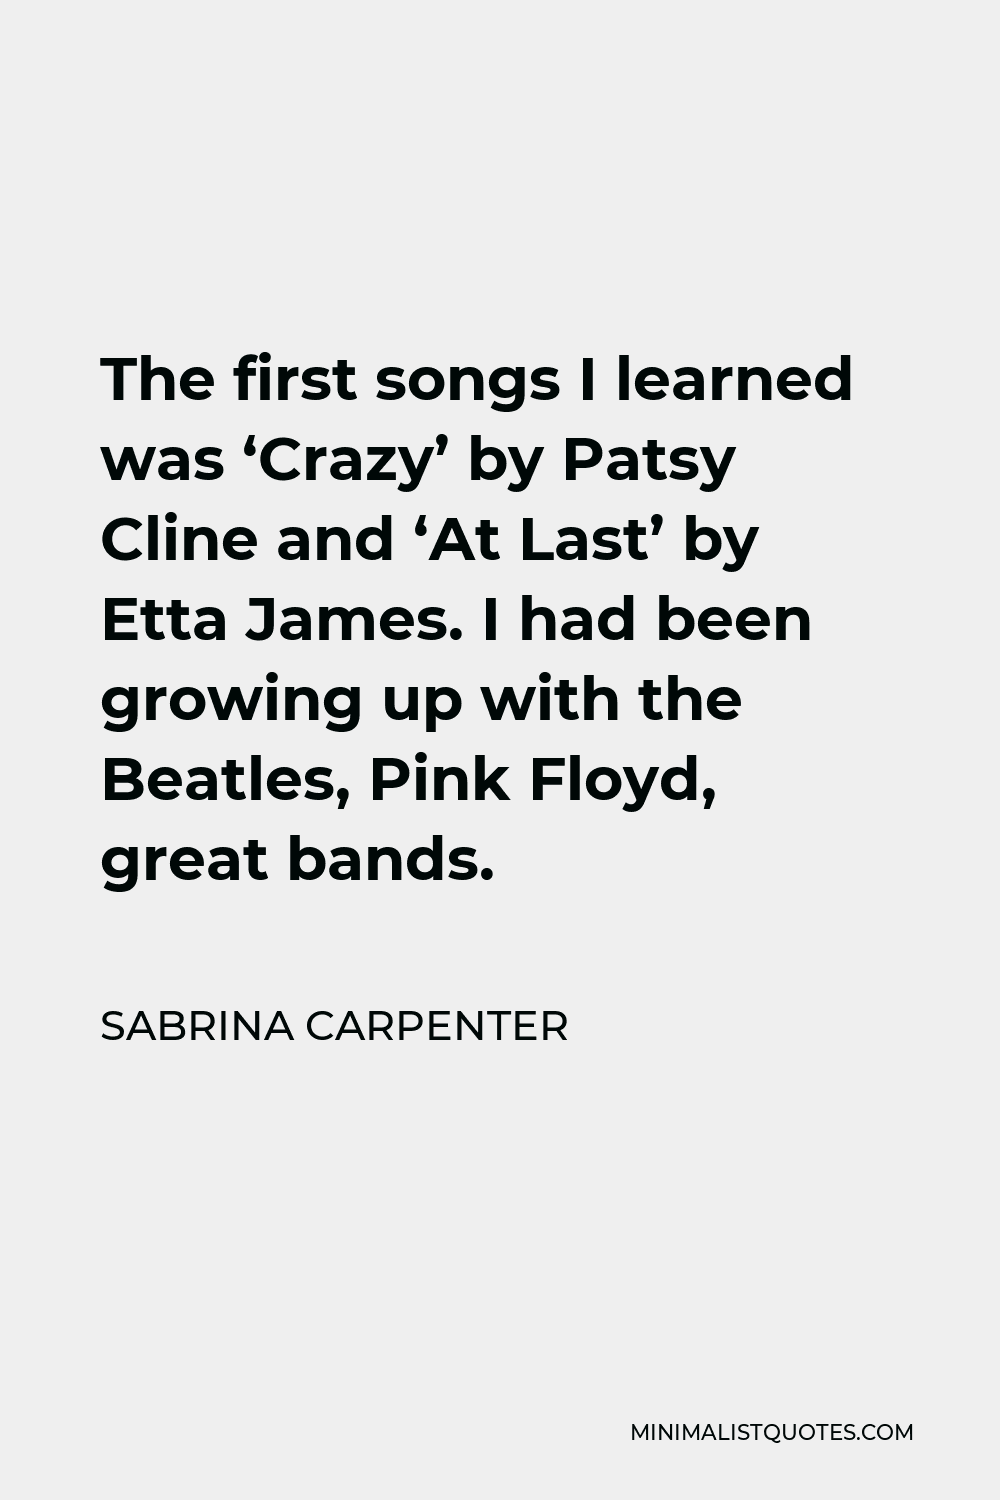 Sabrina Carpenter Quote - The first songs I learned was ‘Crazy’ by Patsy Cline and ‘At Last’ by Etta James. I had been growing up with the Beatles, Pink Floyd, great bands.